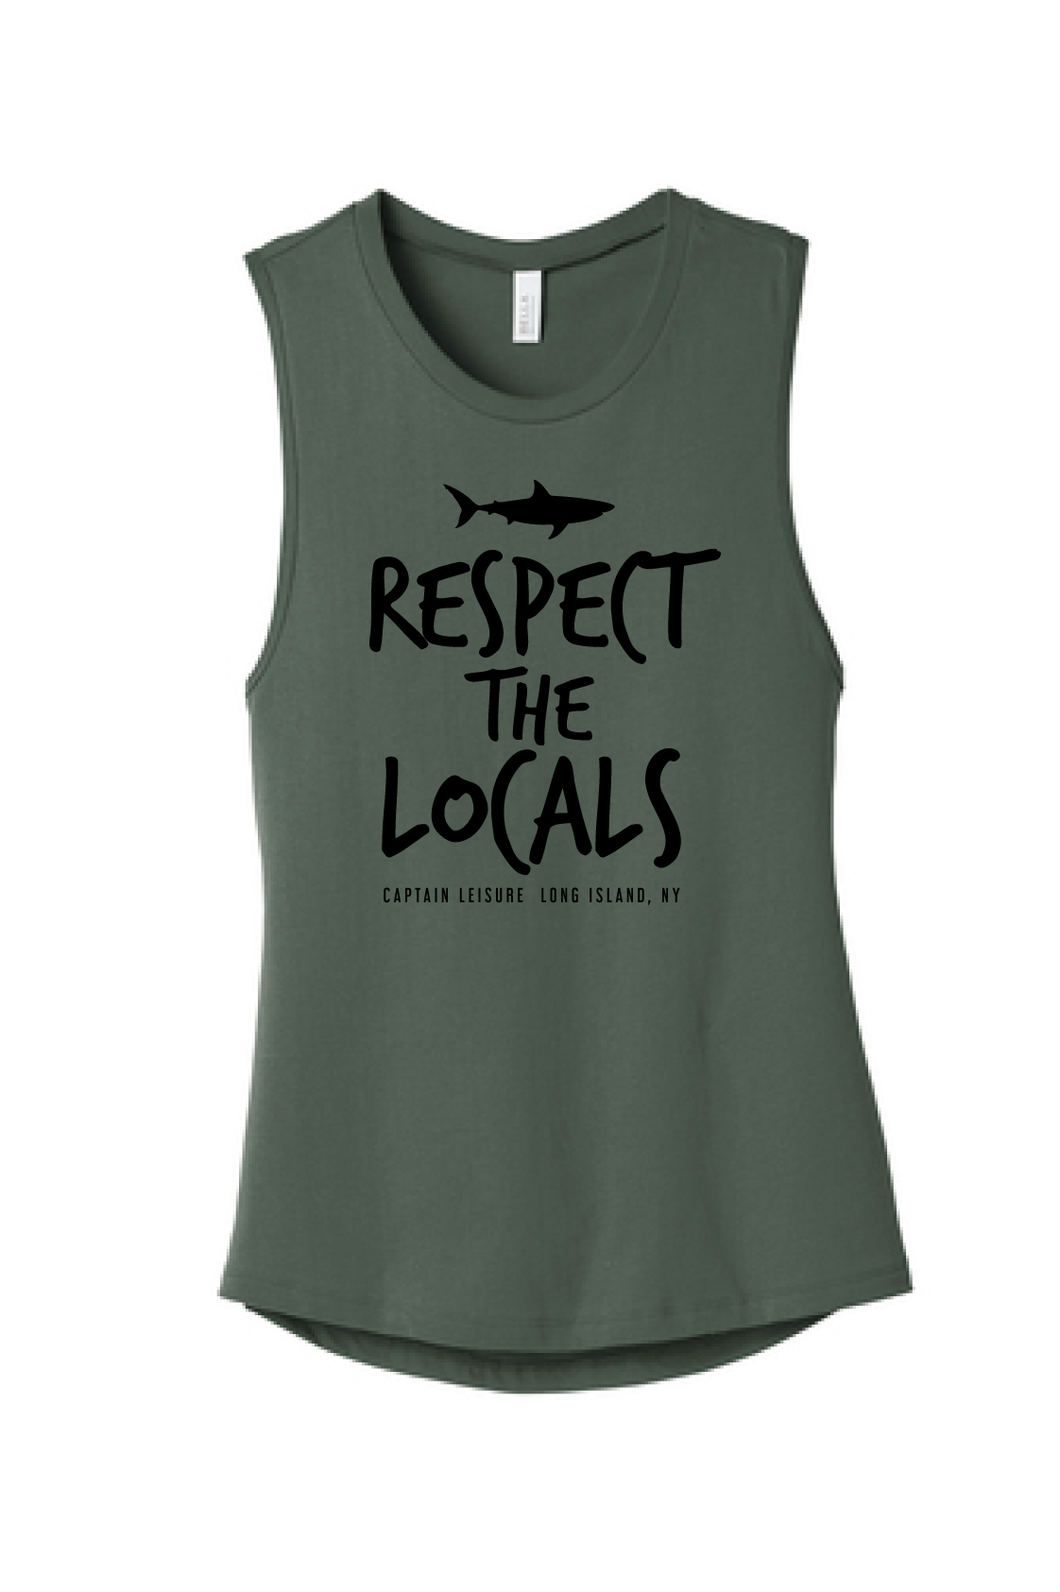 SALE: Respect the Locals Ladies Muscle Tank